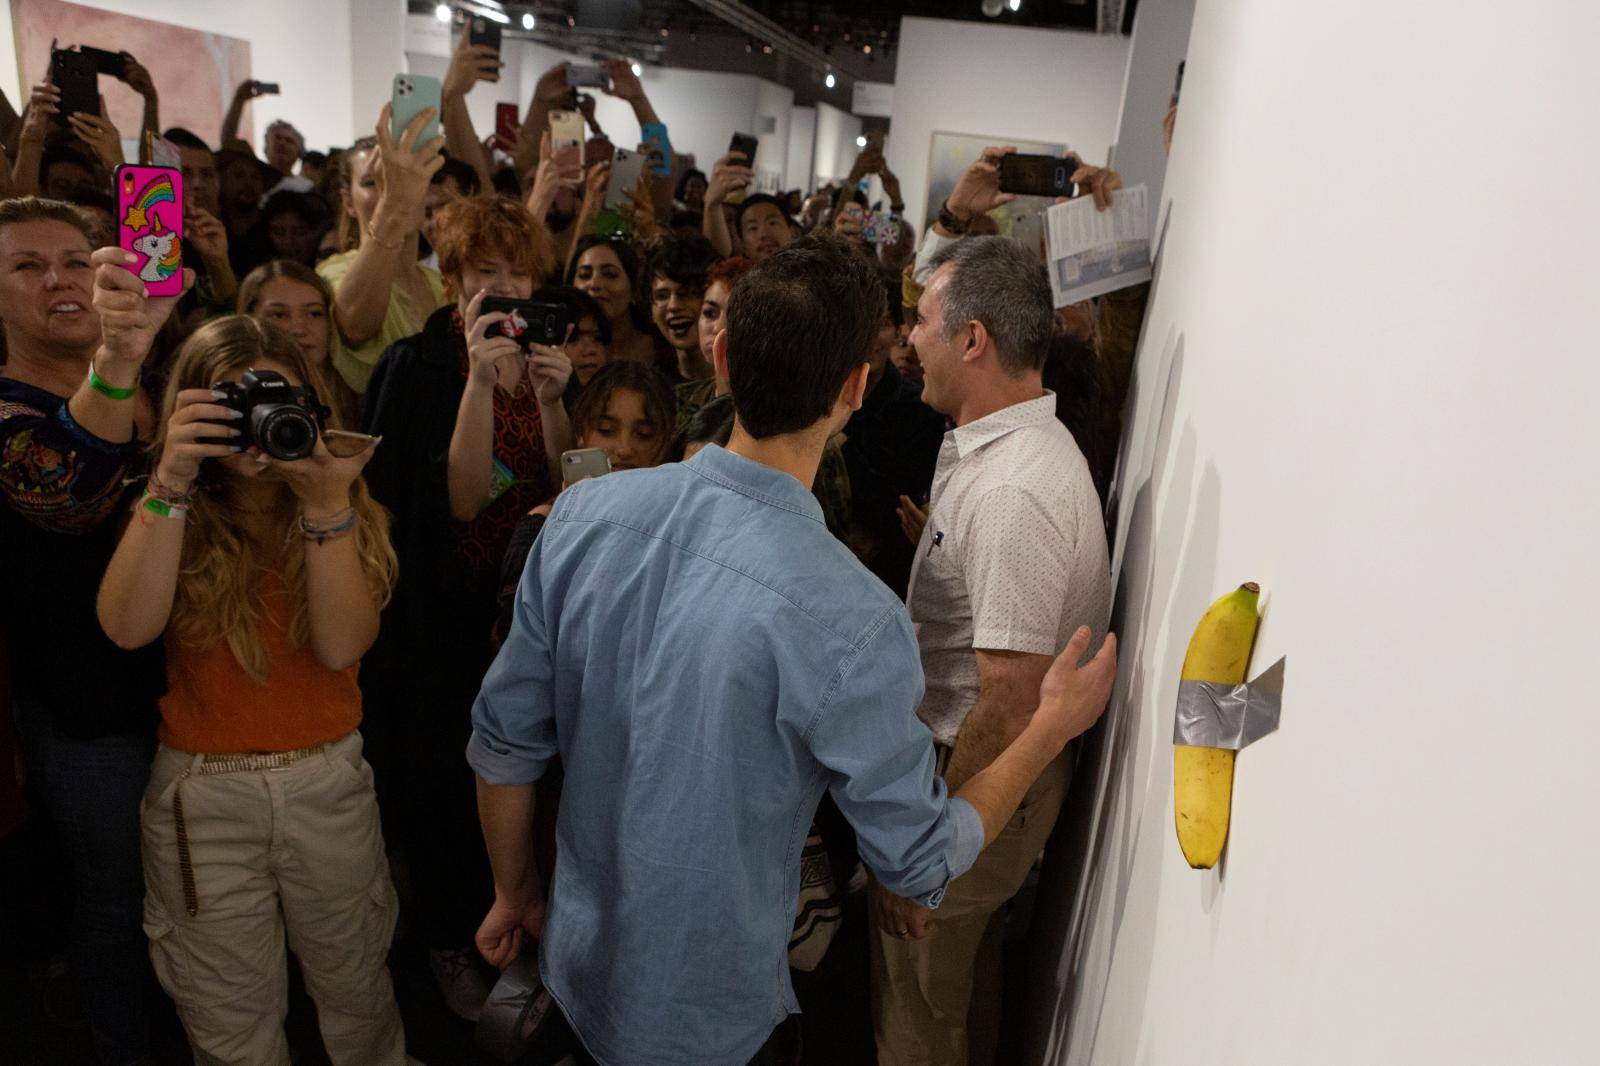 Art Basel visitors use their phones in front of a banana attached with duct-tape that replaces the artwork 'Comedian' by the artist Maurizio Cattelan, which was eaten by David Datuna, in Miami Beach